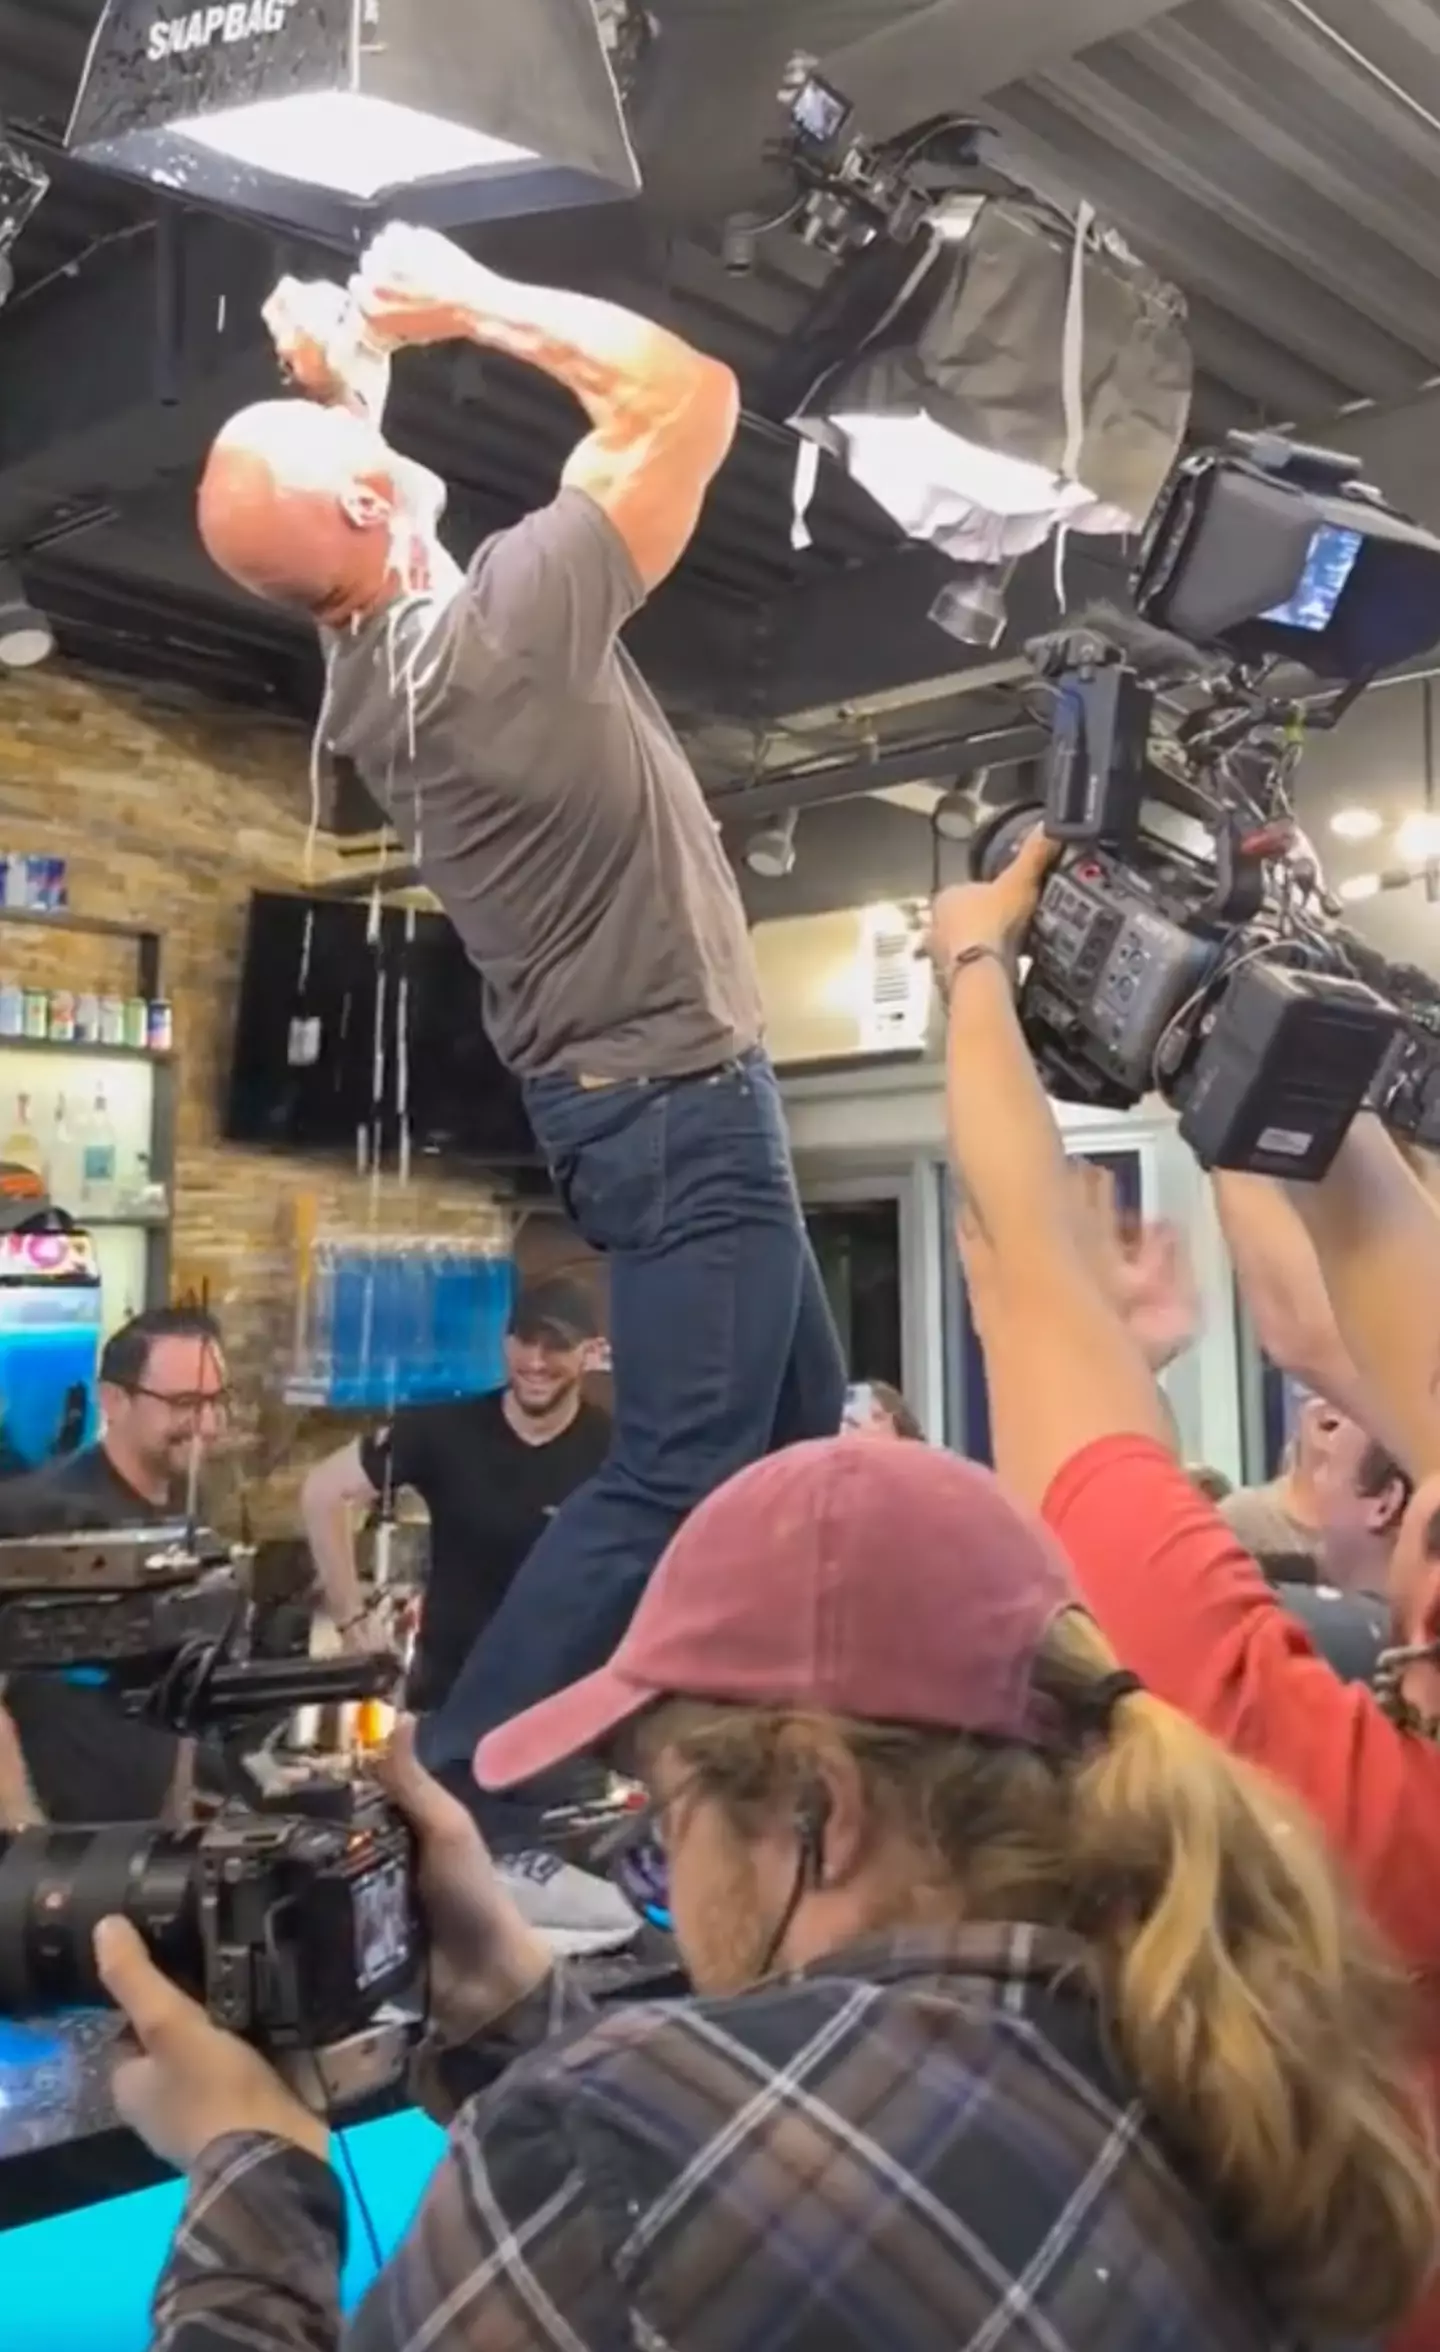 'Stone Cold' Steve Austin has surprised guests at a bar by doing an iconic beer chug.